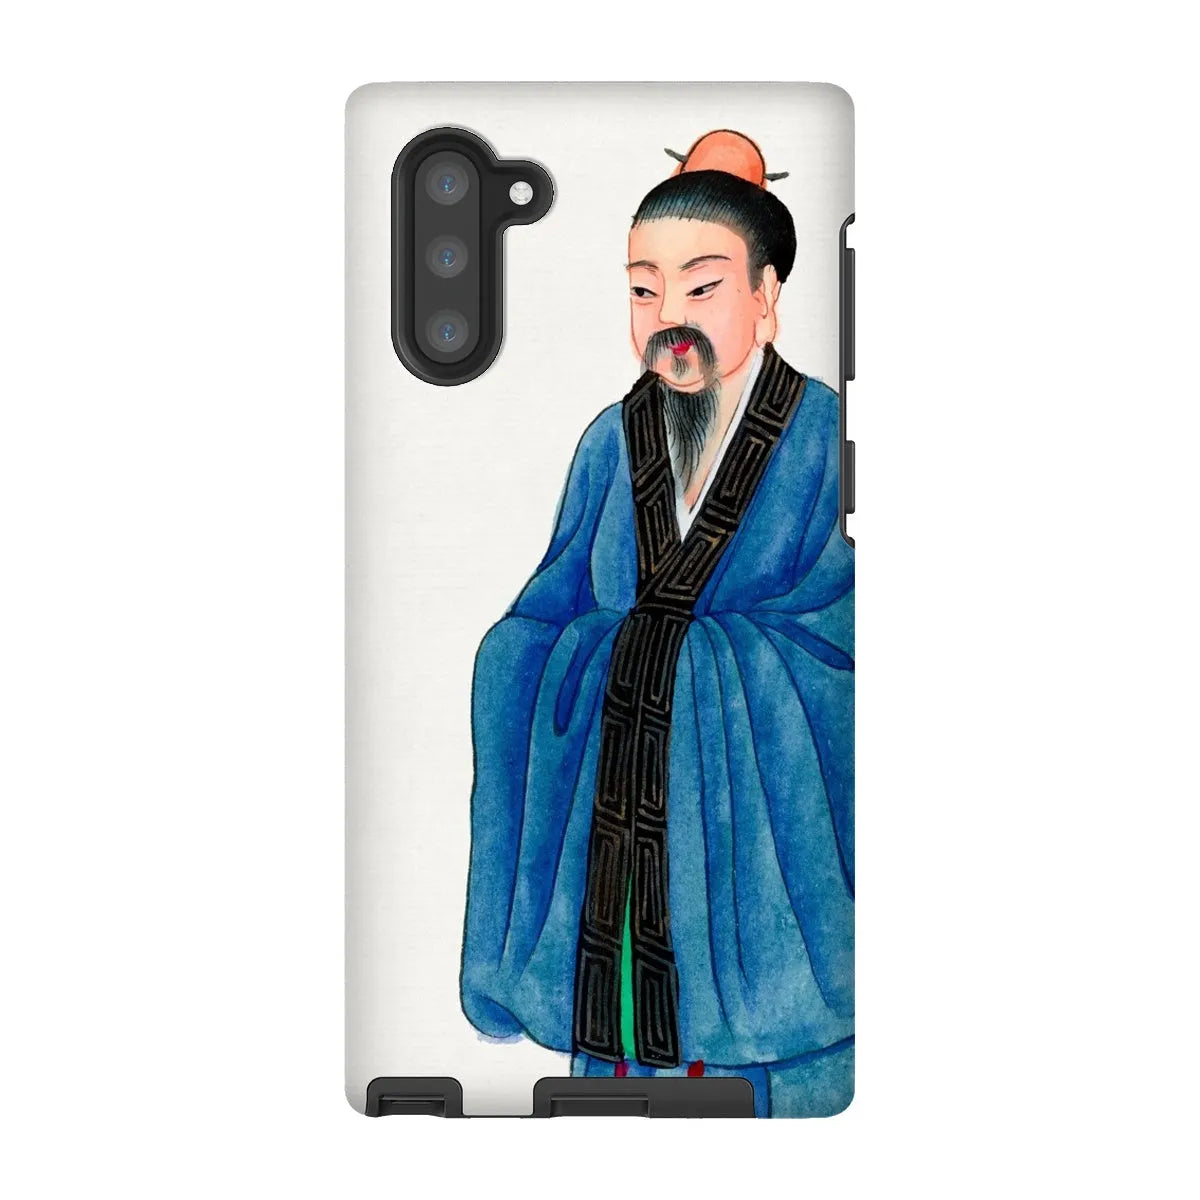 Grand Master - Chinese Buddhist Aesthetic Art Phone Case - Samsung Galaxy Note 10 / Matte - Mobile Phone Cases